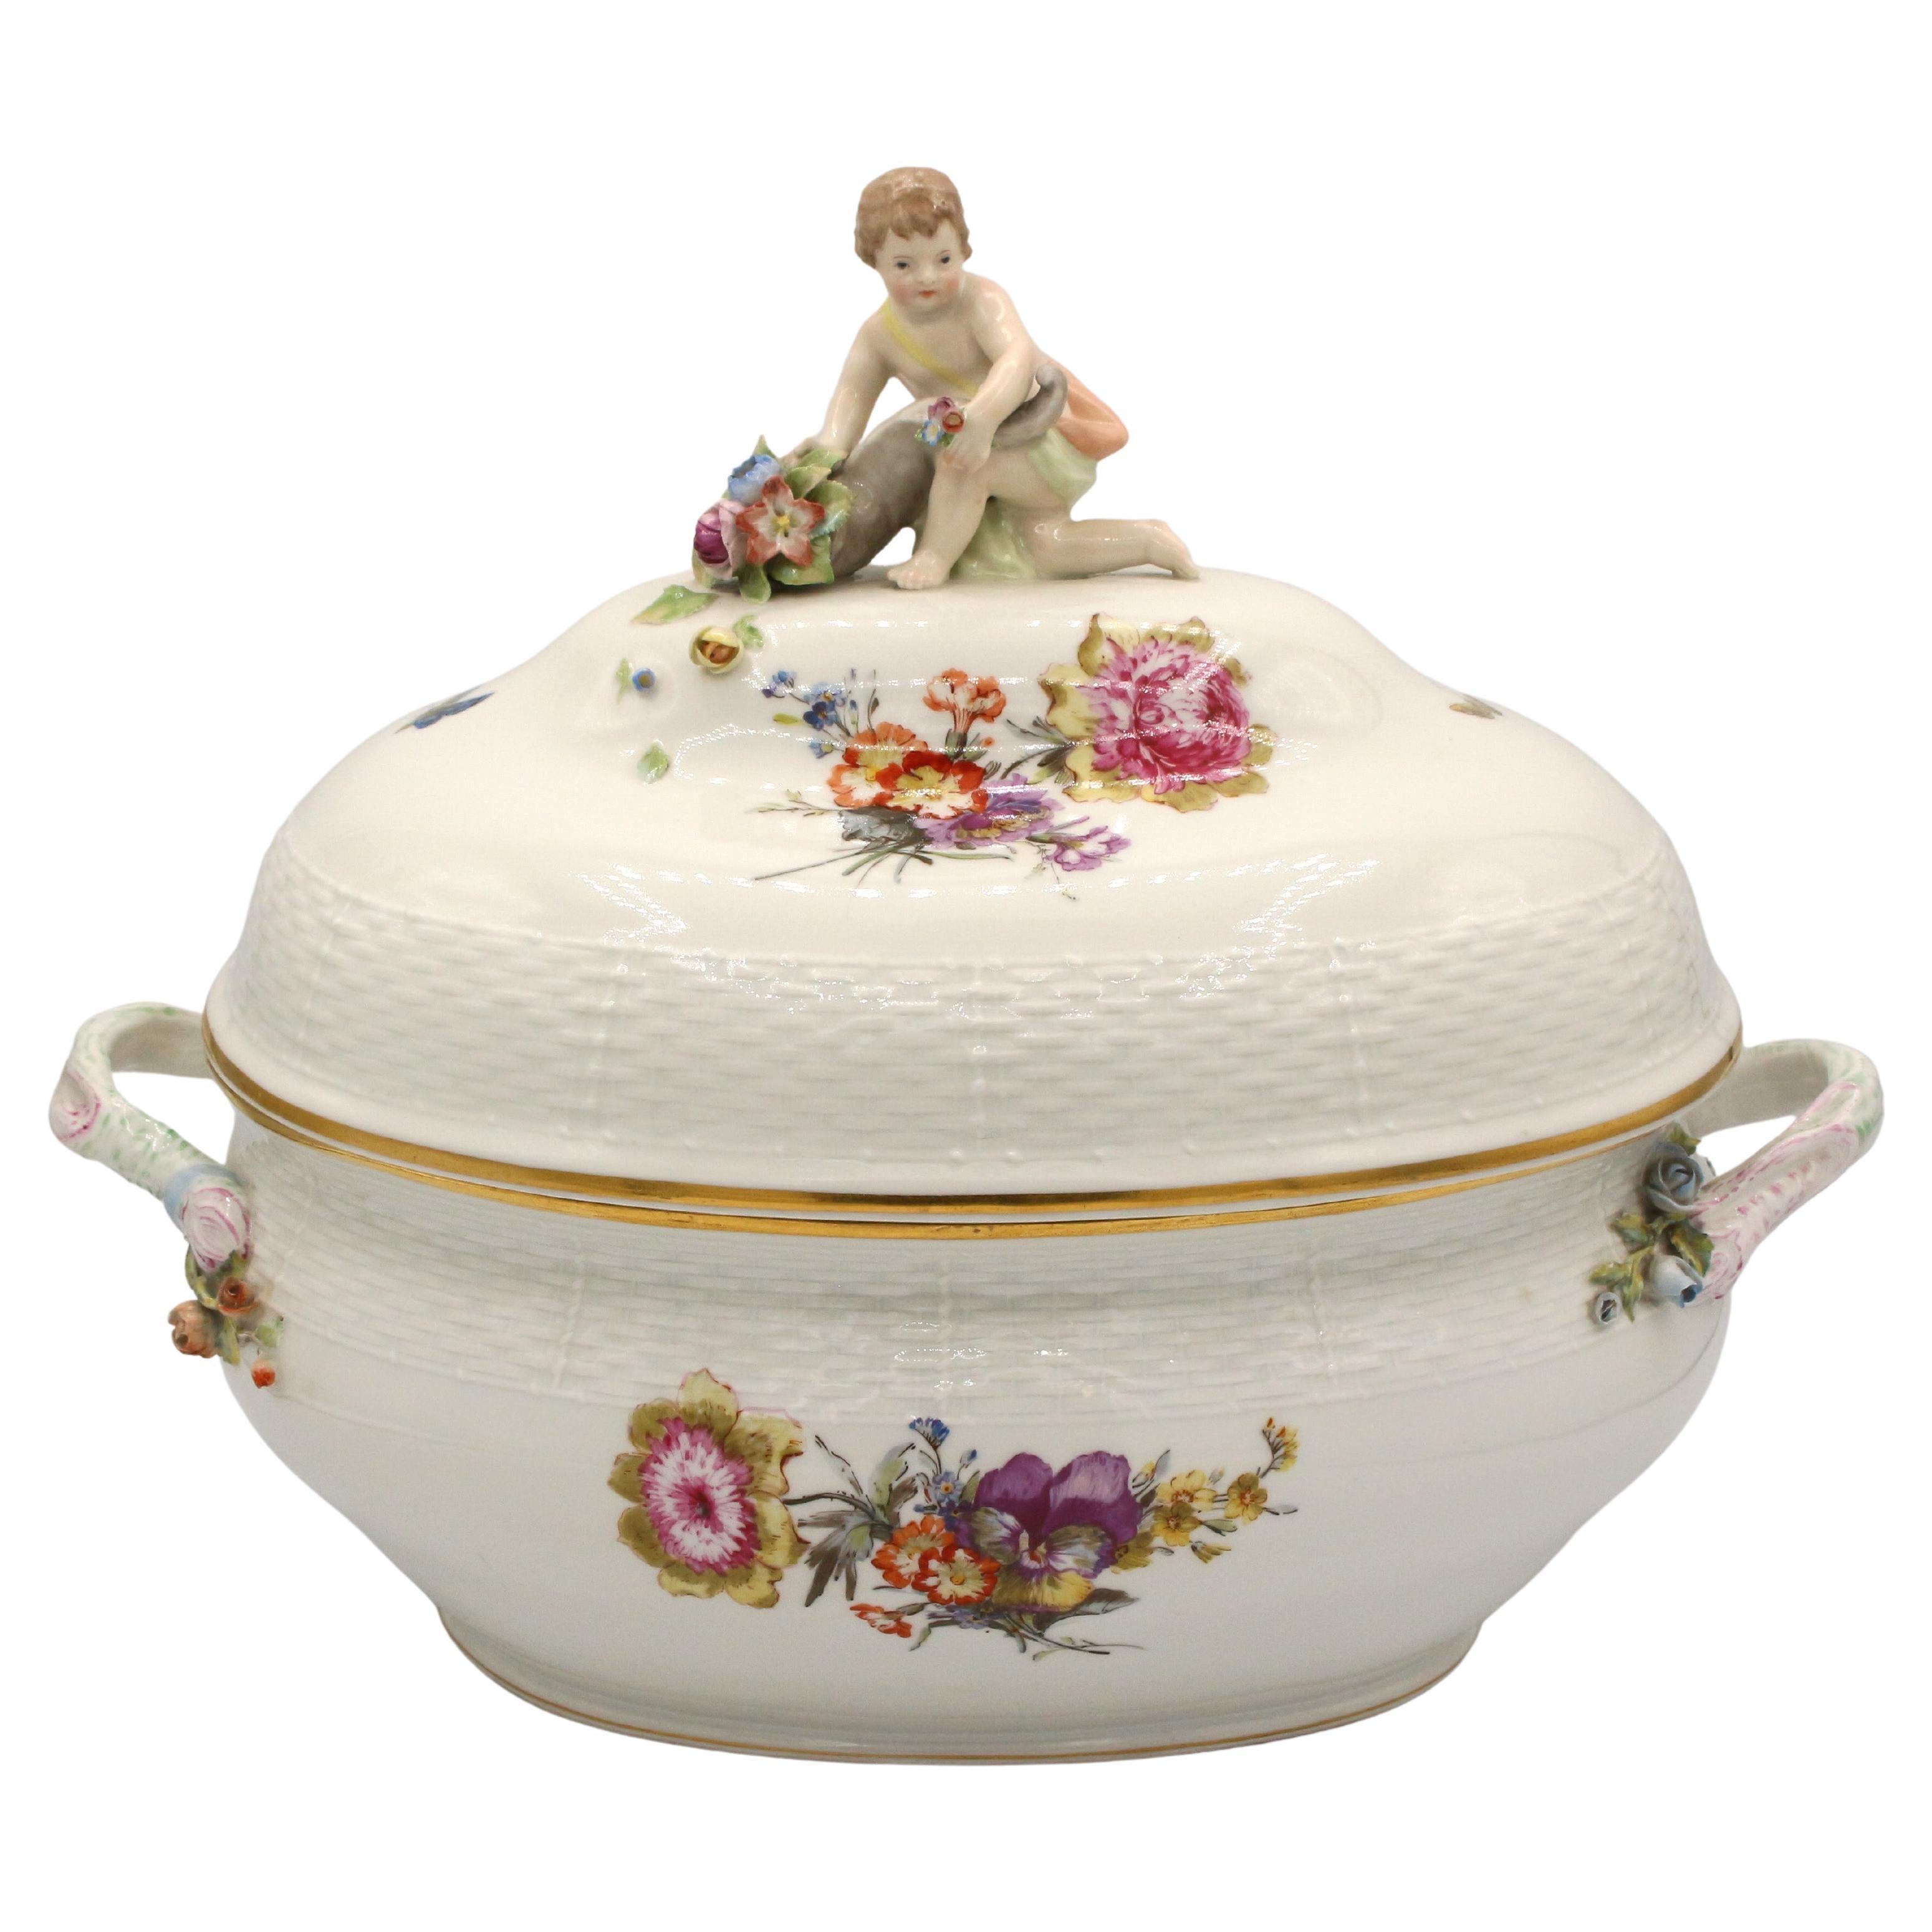 Late 19th Century Covered Porcelain Tureen by KPM For Sale